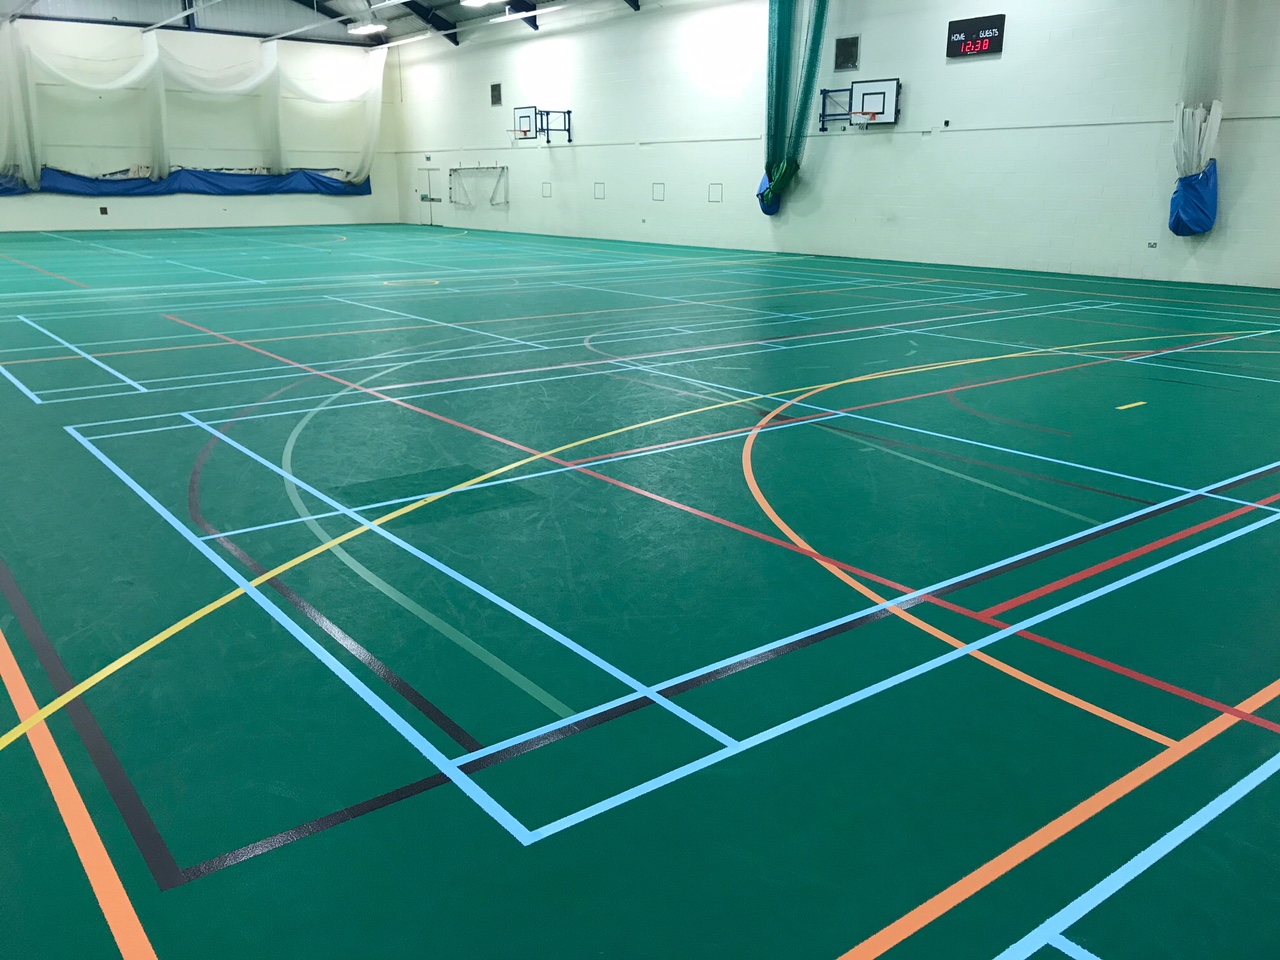 School sports hall floor after Deep clean and refurbishment by Sports Surfaces UK